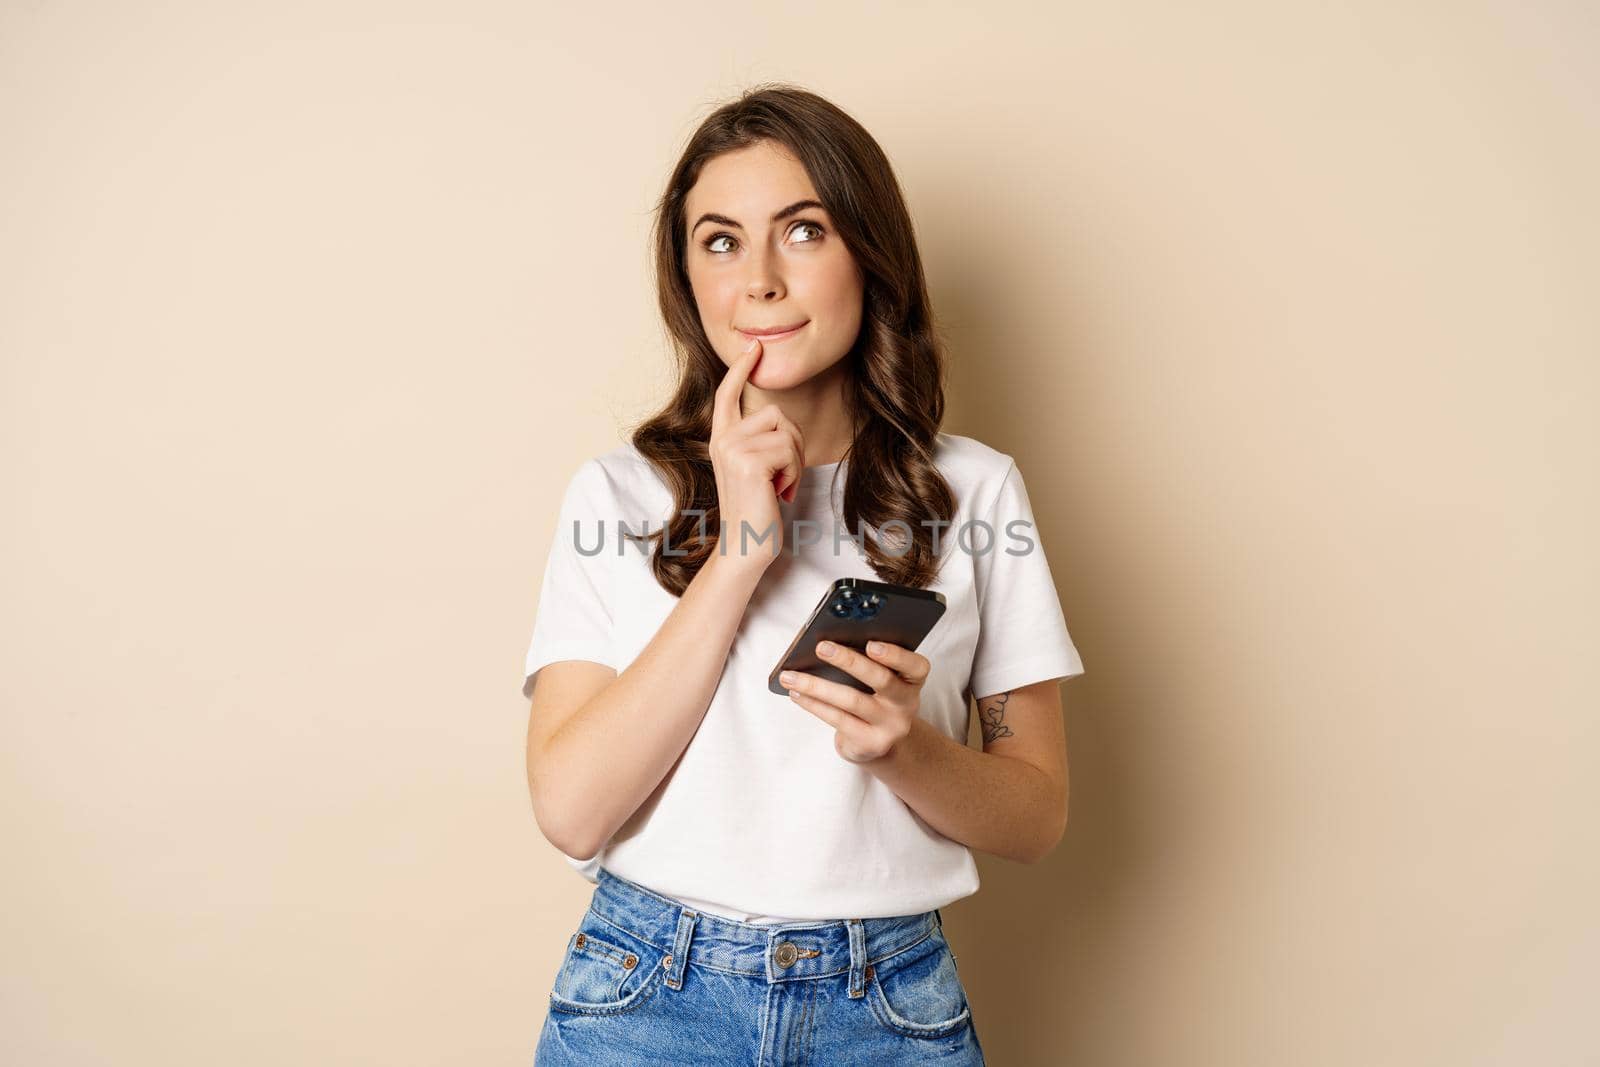 Girl thinks, holds mobile phone, looks up thoughtful, stands over beige background.